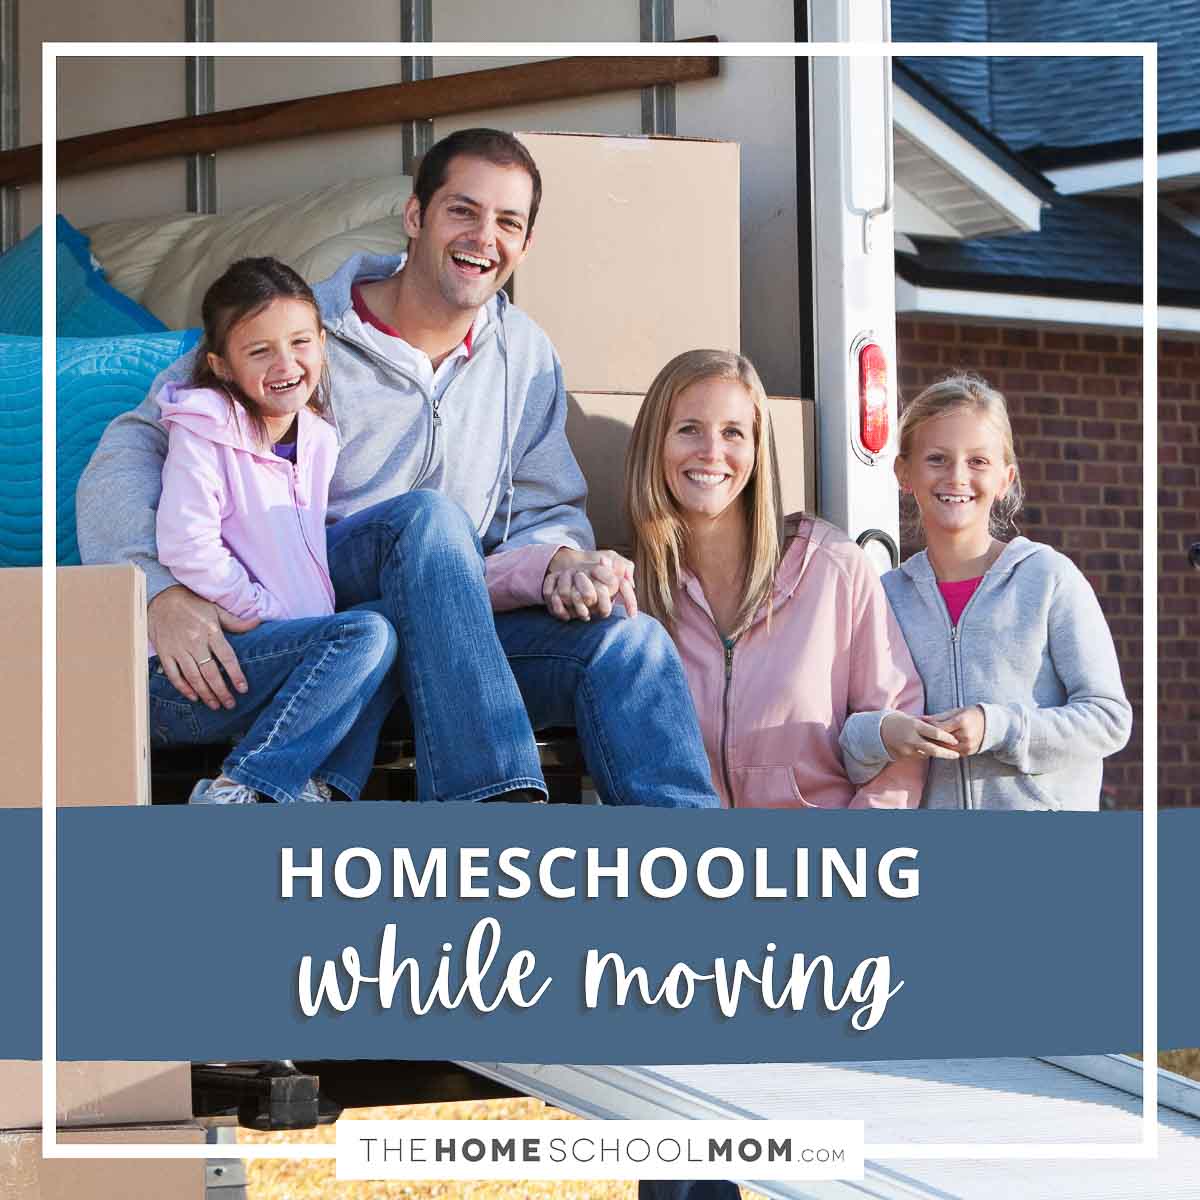 homeschooling while moving